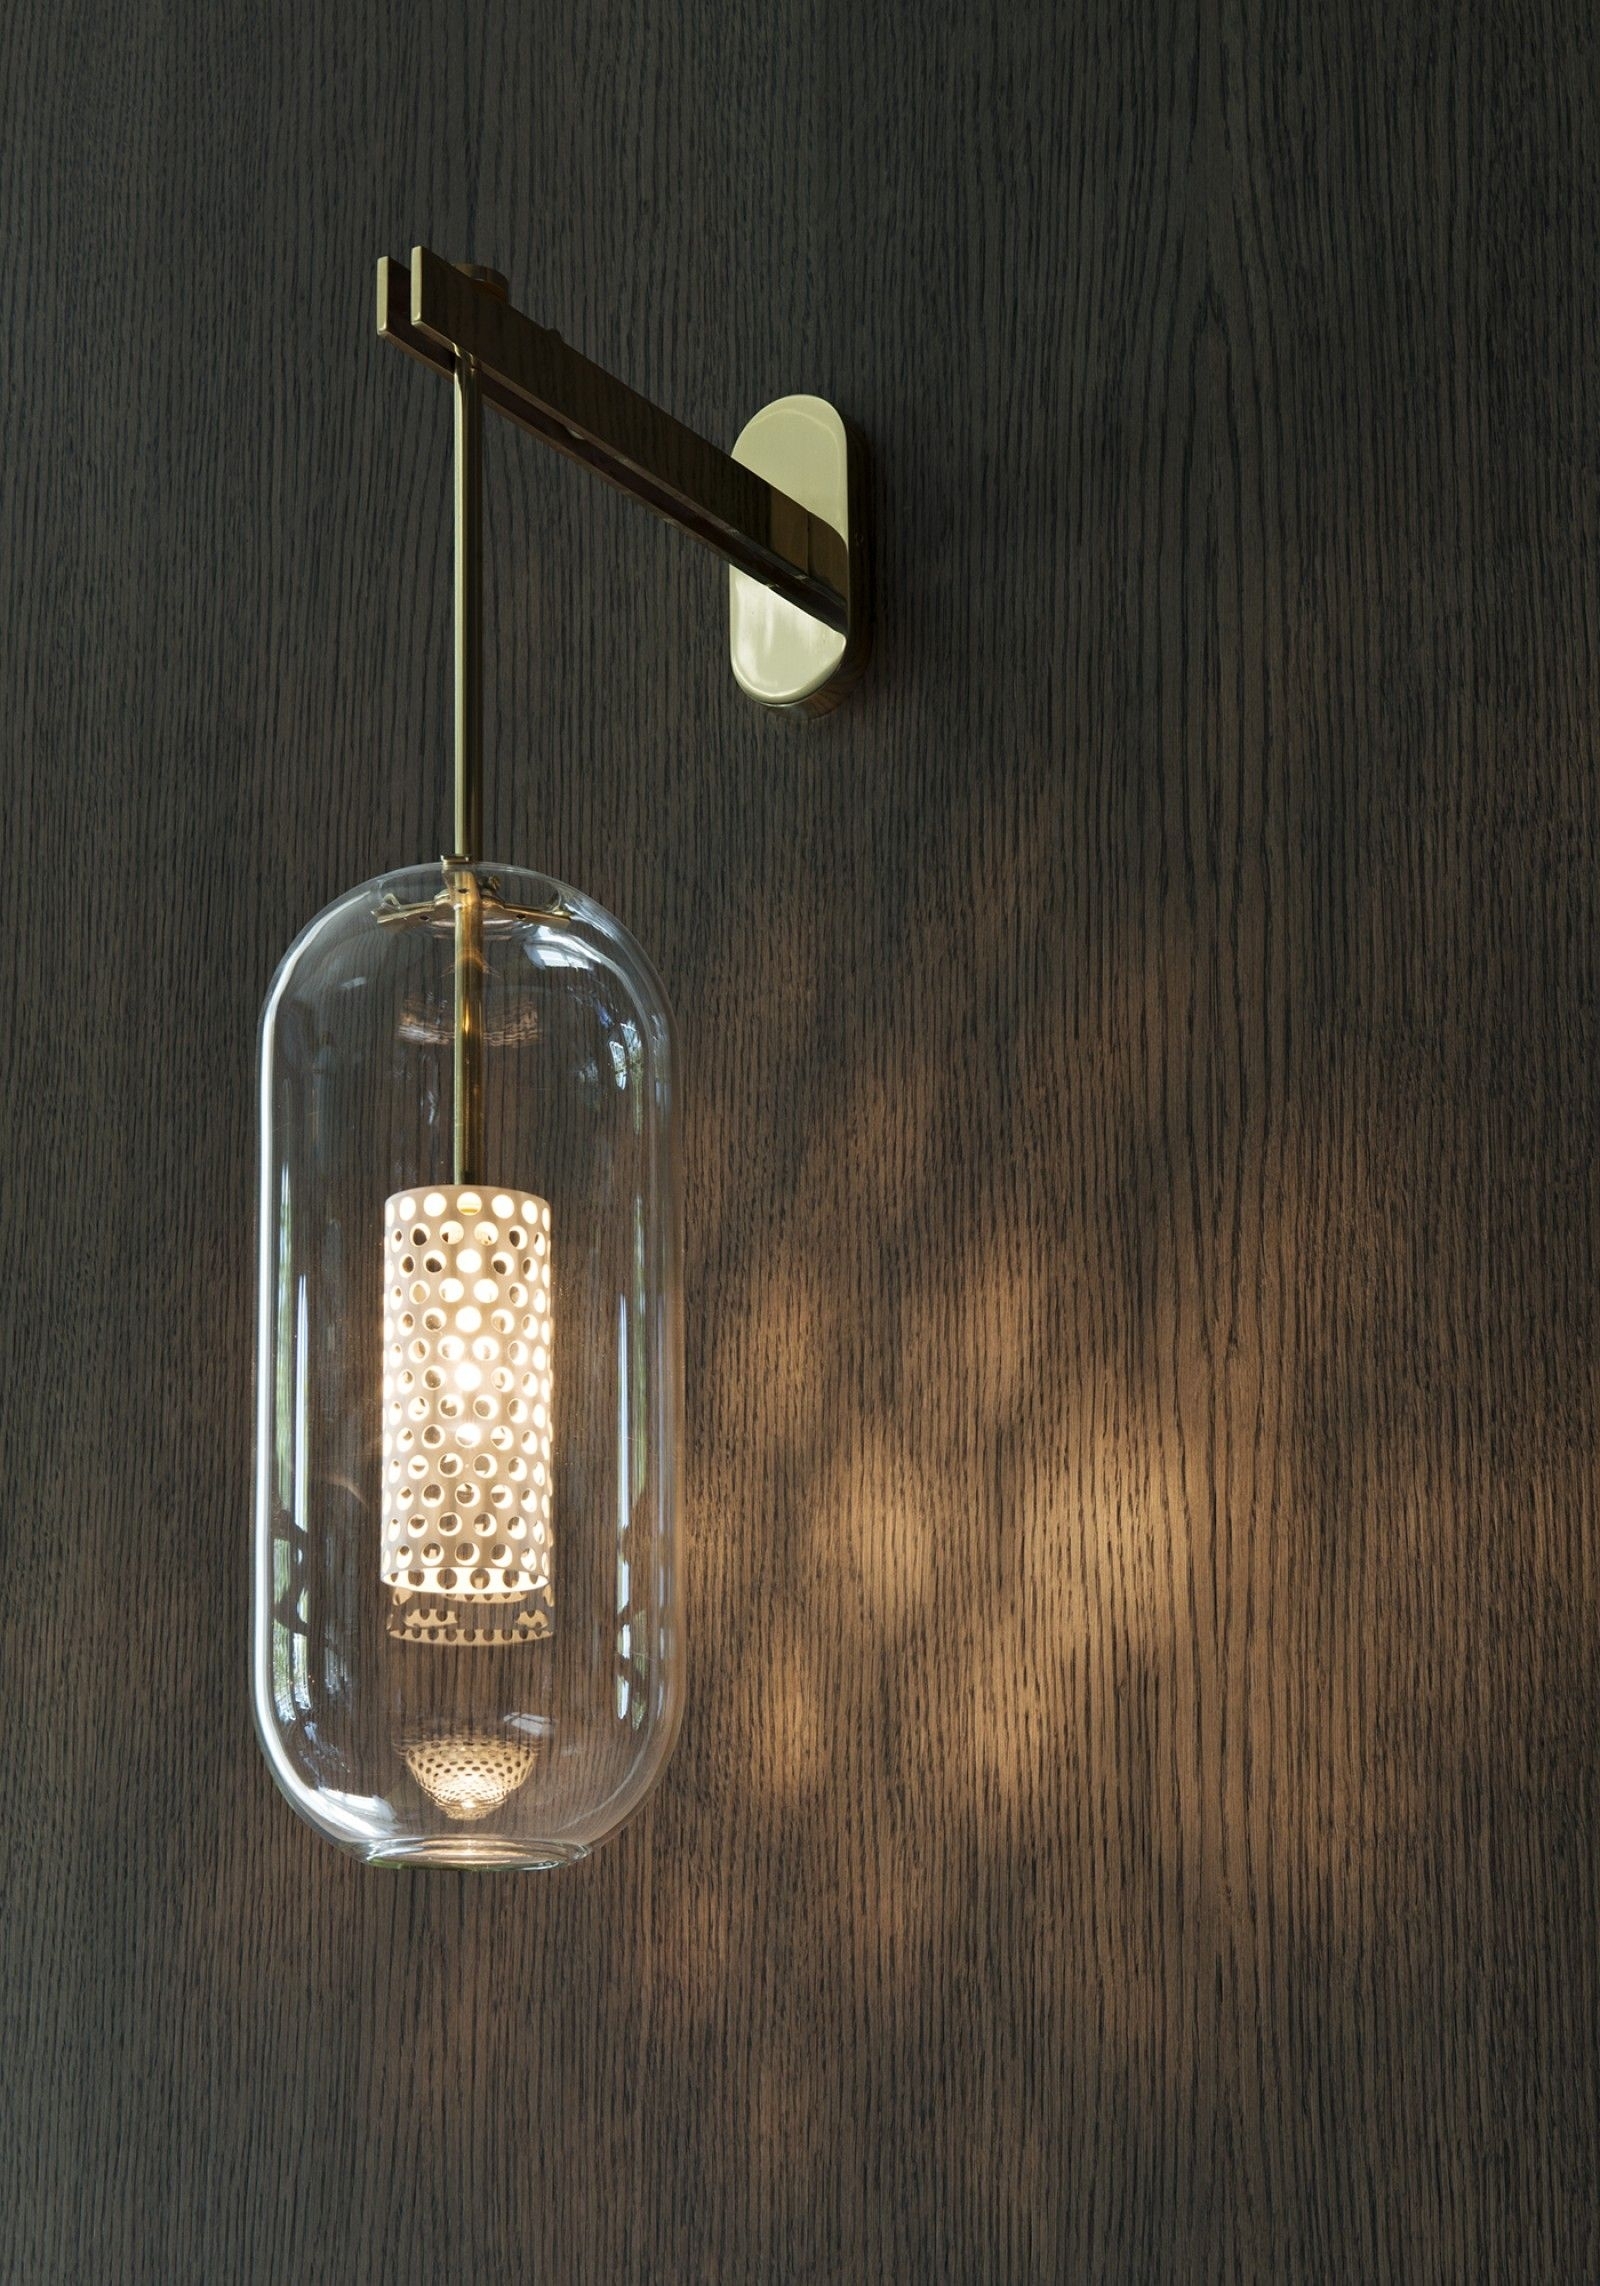 Wall Lamp Cord Covers - Foter